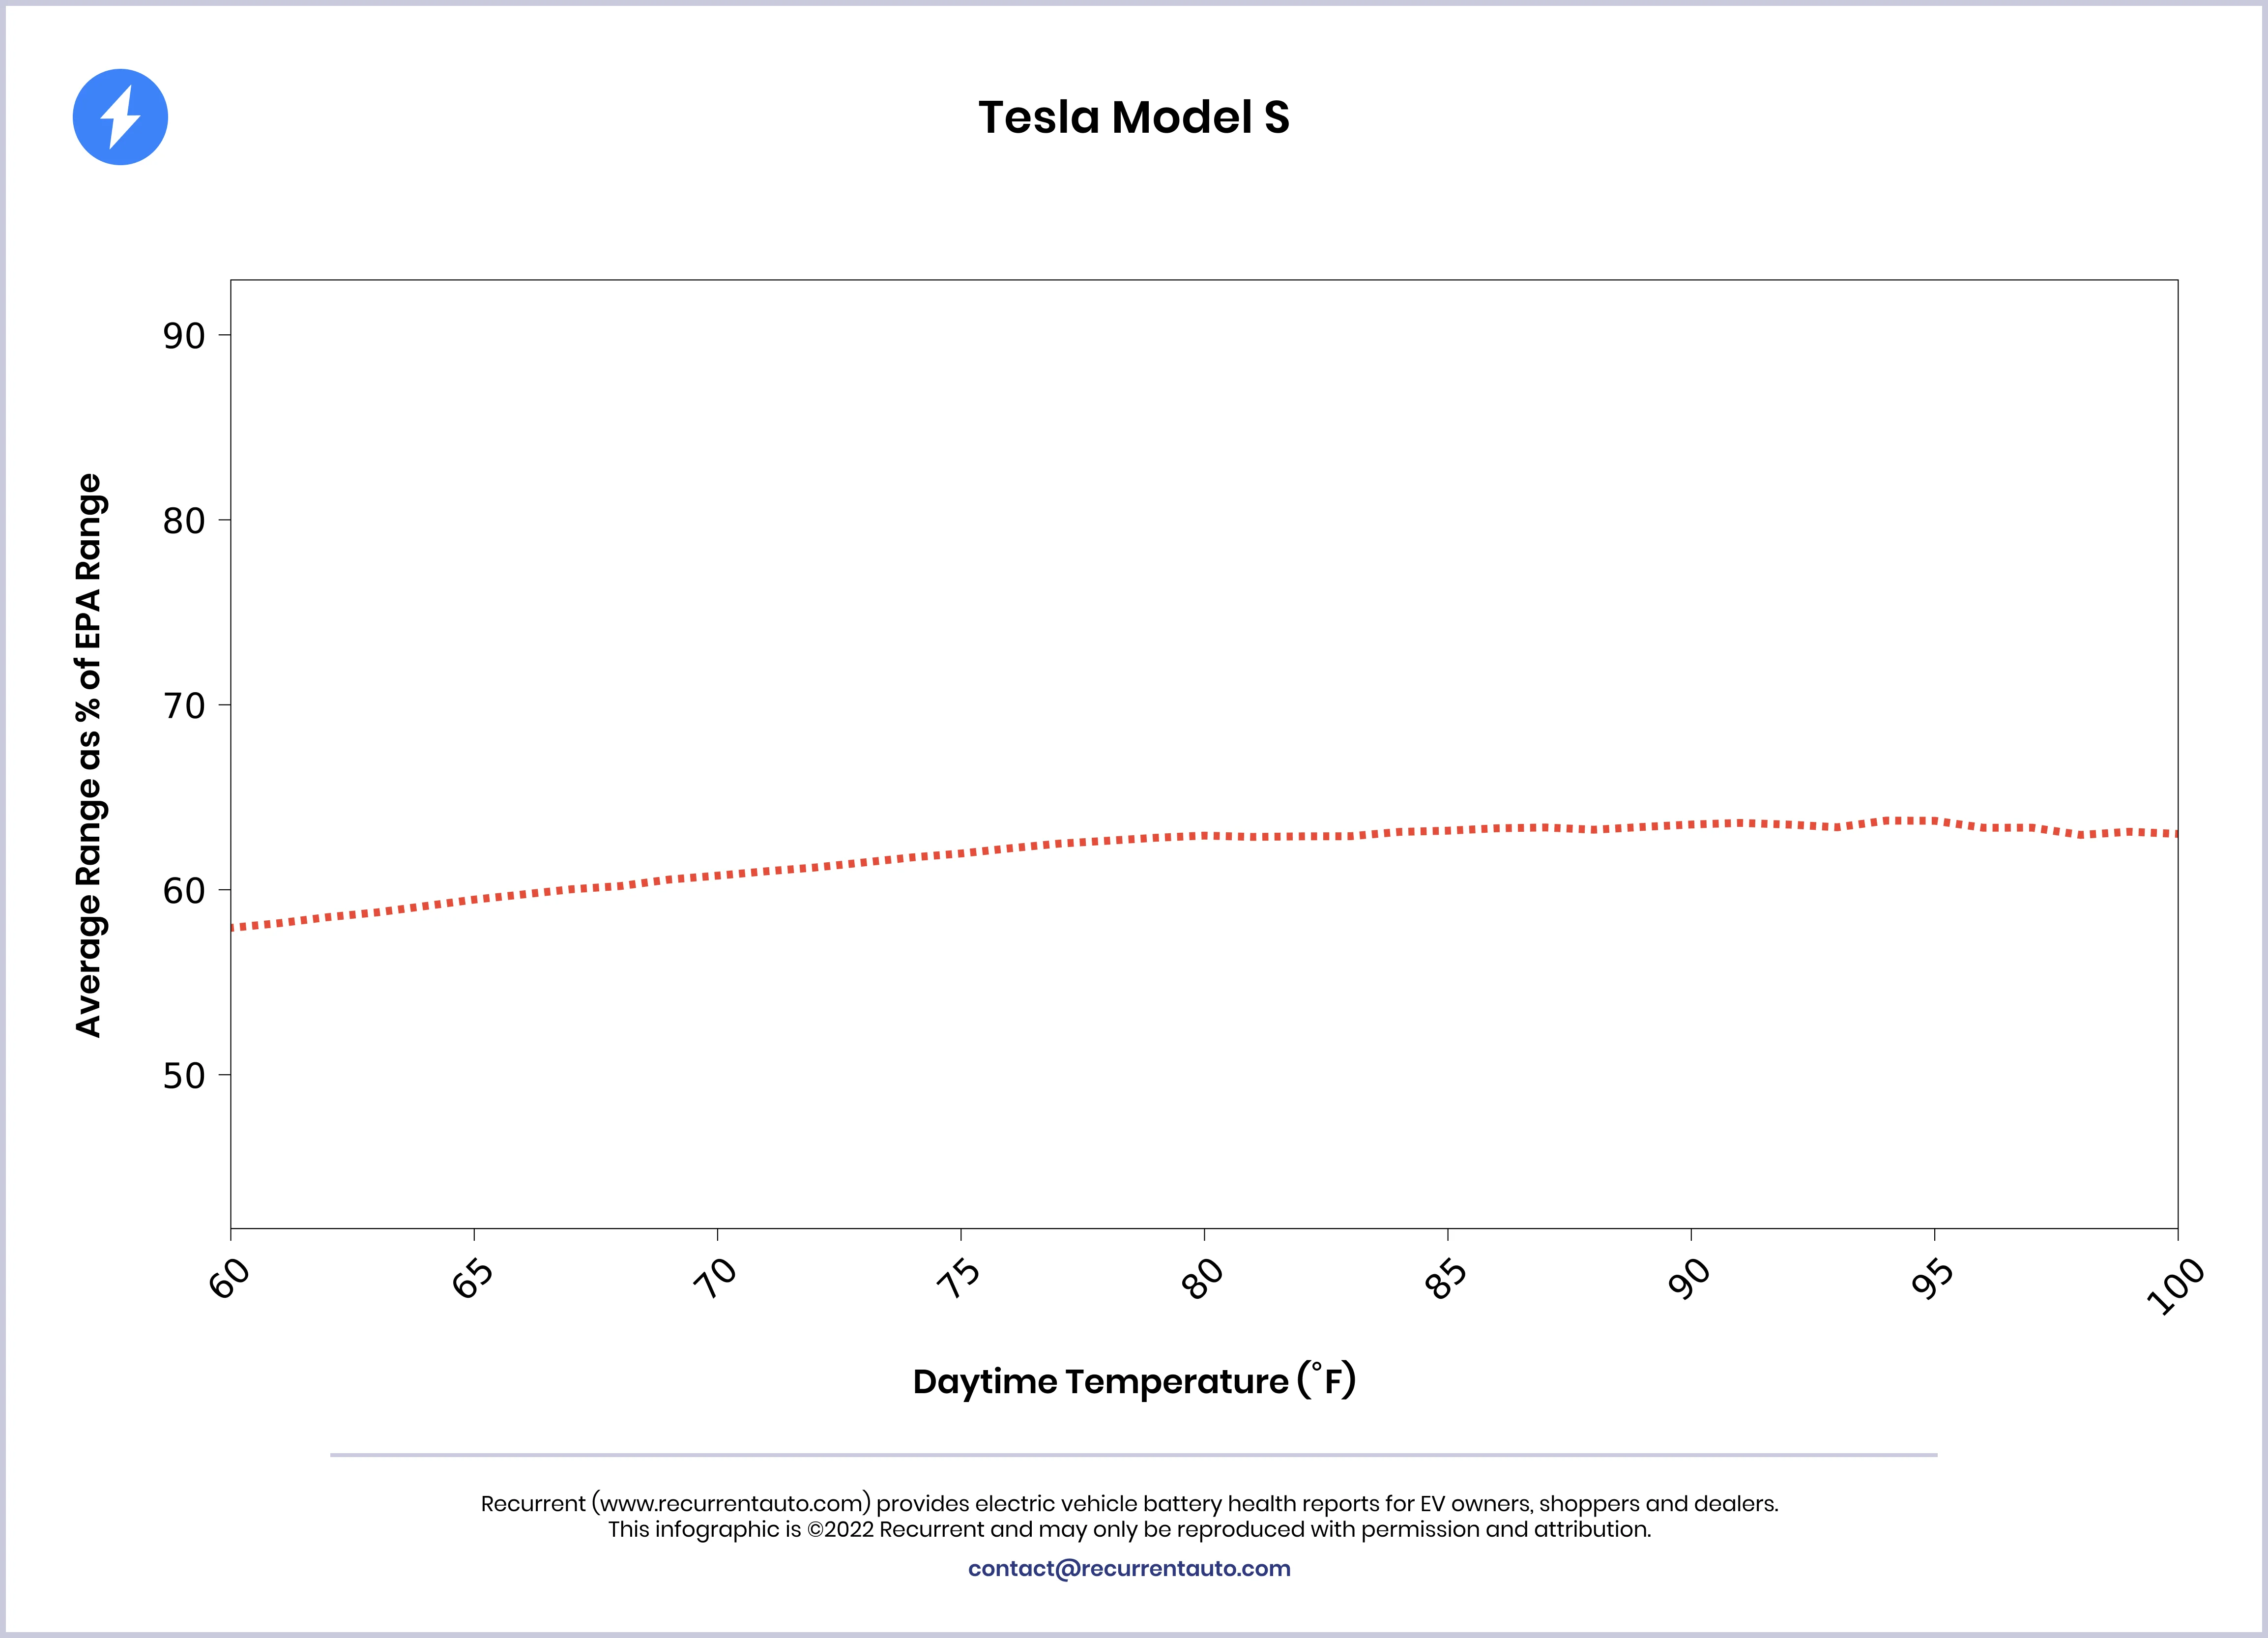 Range dependence on temperature for Model S